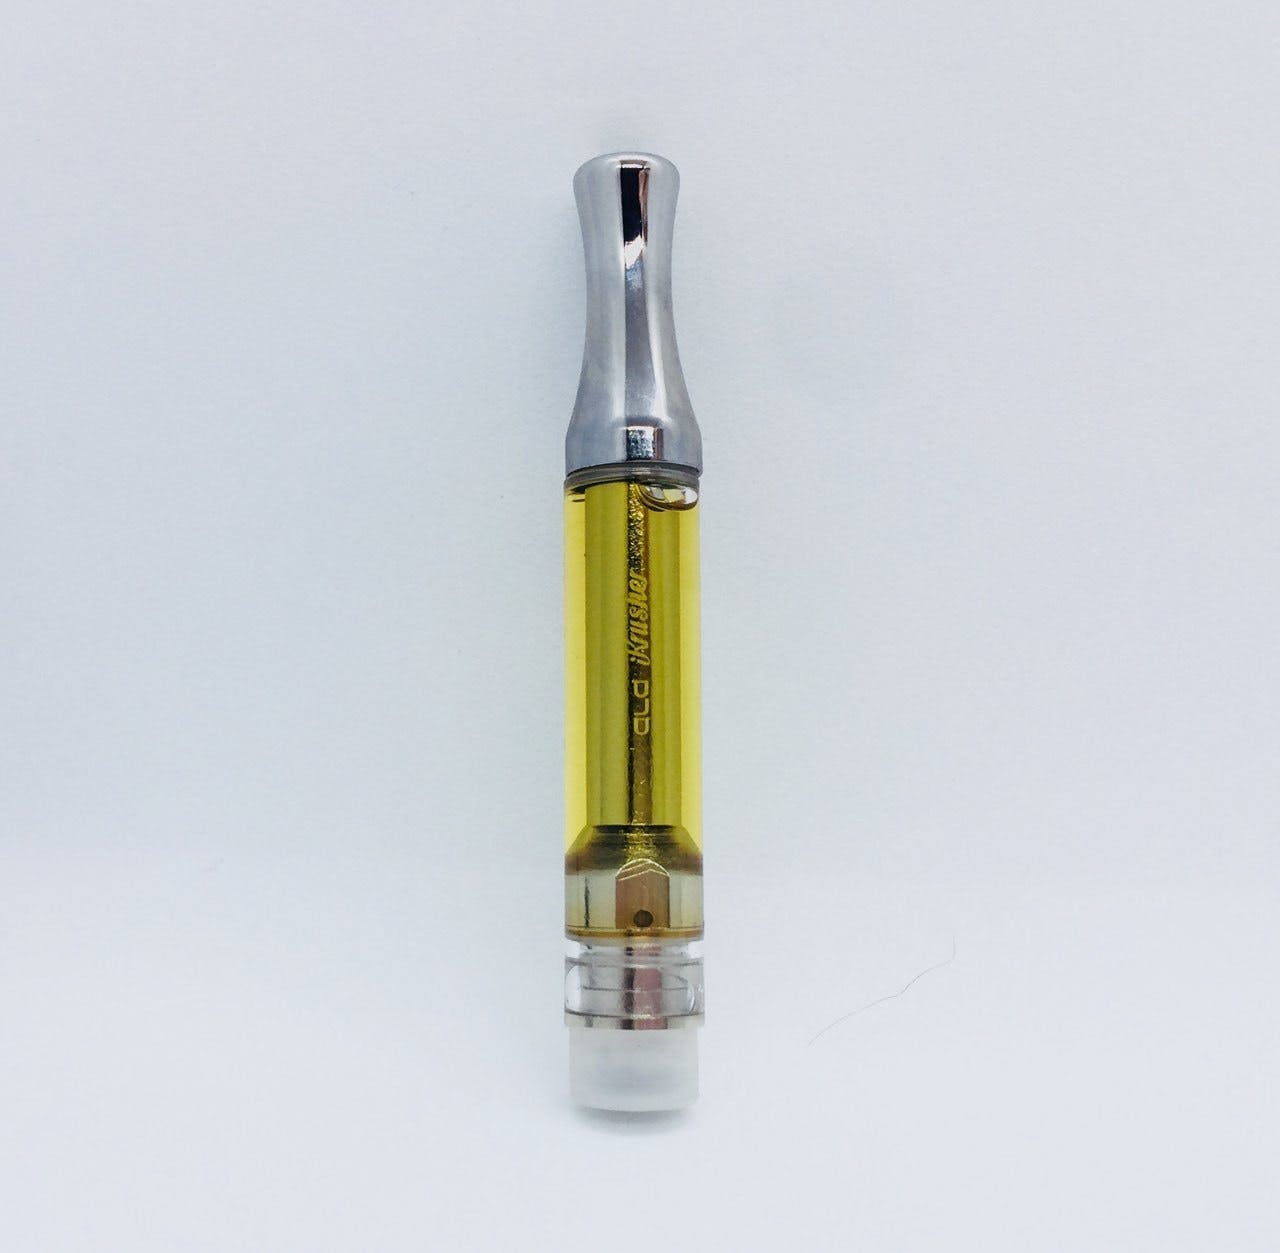 concentrate-twisted-extracts-strawberry-banana-vape-cartridge